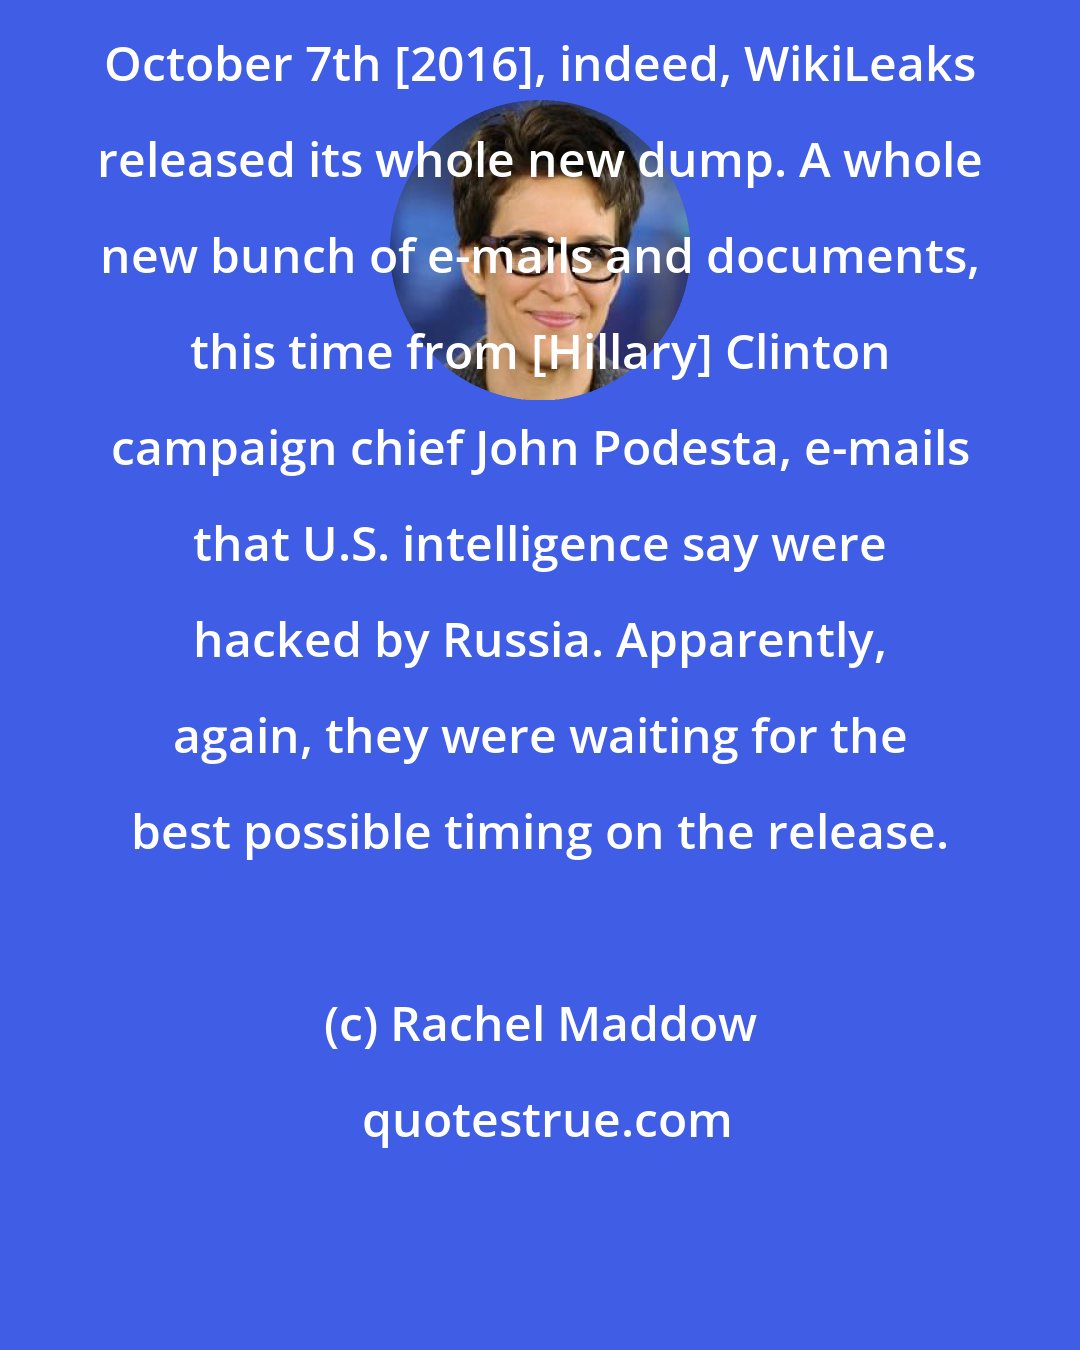 Rachel Maddow: October 7th [2016], indeed, WikiLeaks released its whole new dump. A whole new bunch of e-mails and documents, this time from [Hillary] Clinton campaign chief John Podesta, e-mails that U.S. intelligence say were hacked by Russia. Apparently, again, they were waiting for the best possible timing on the release.